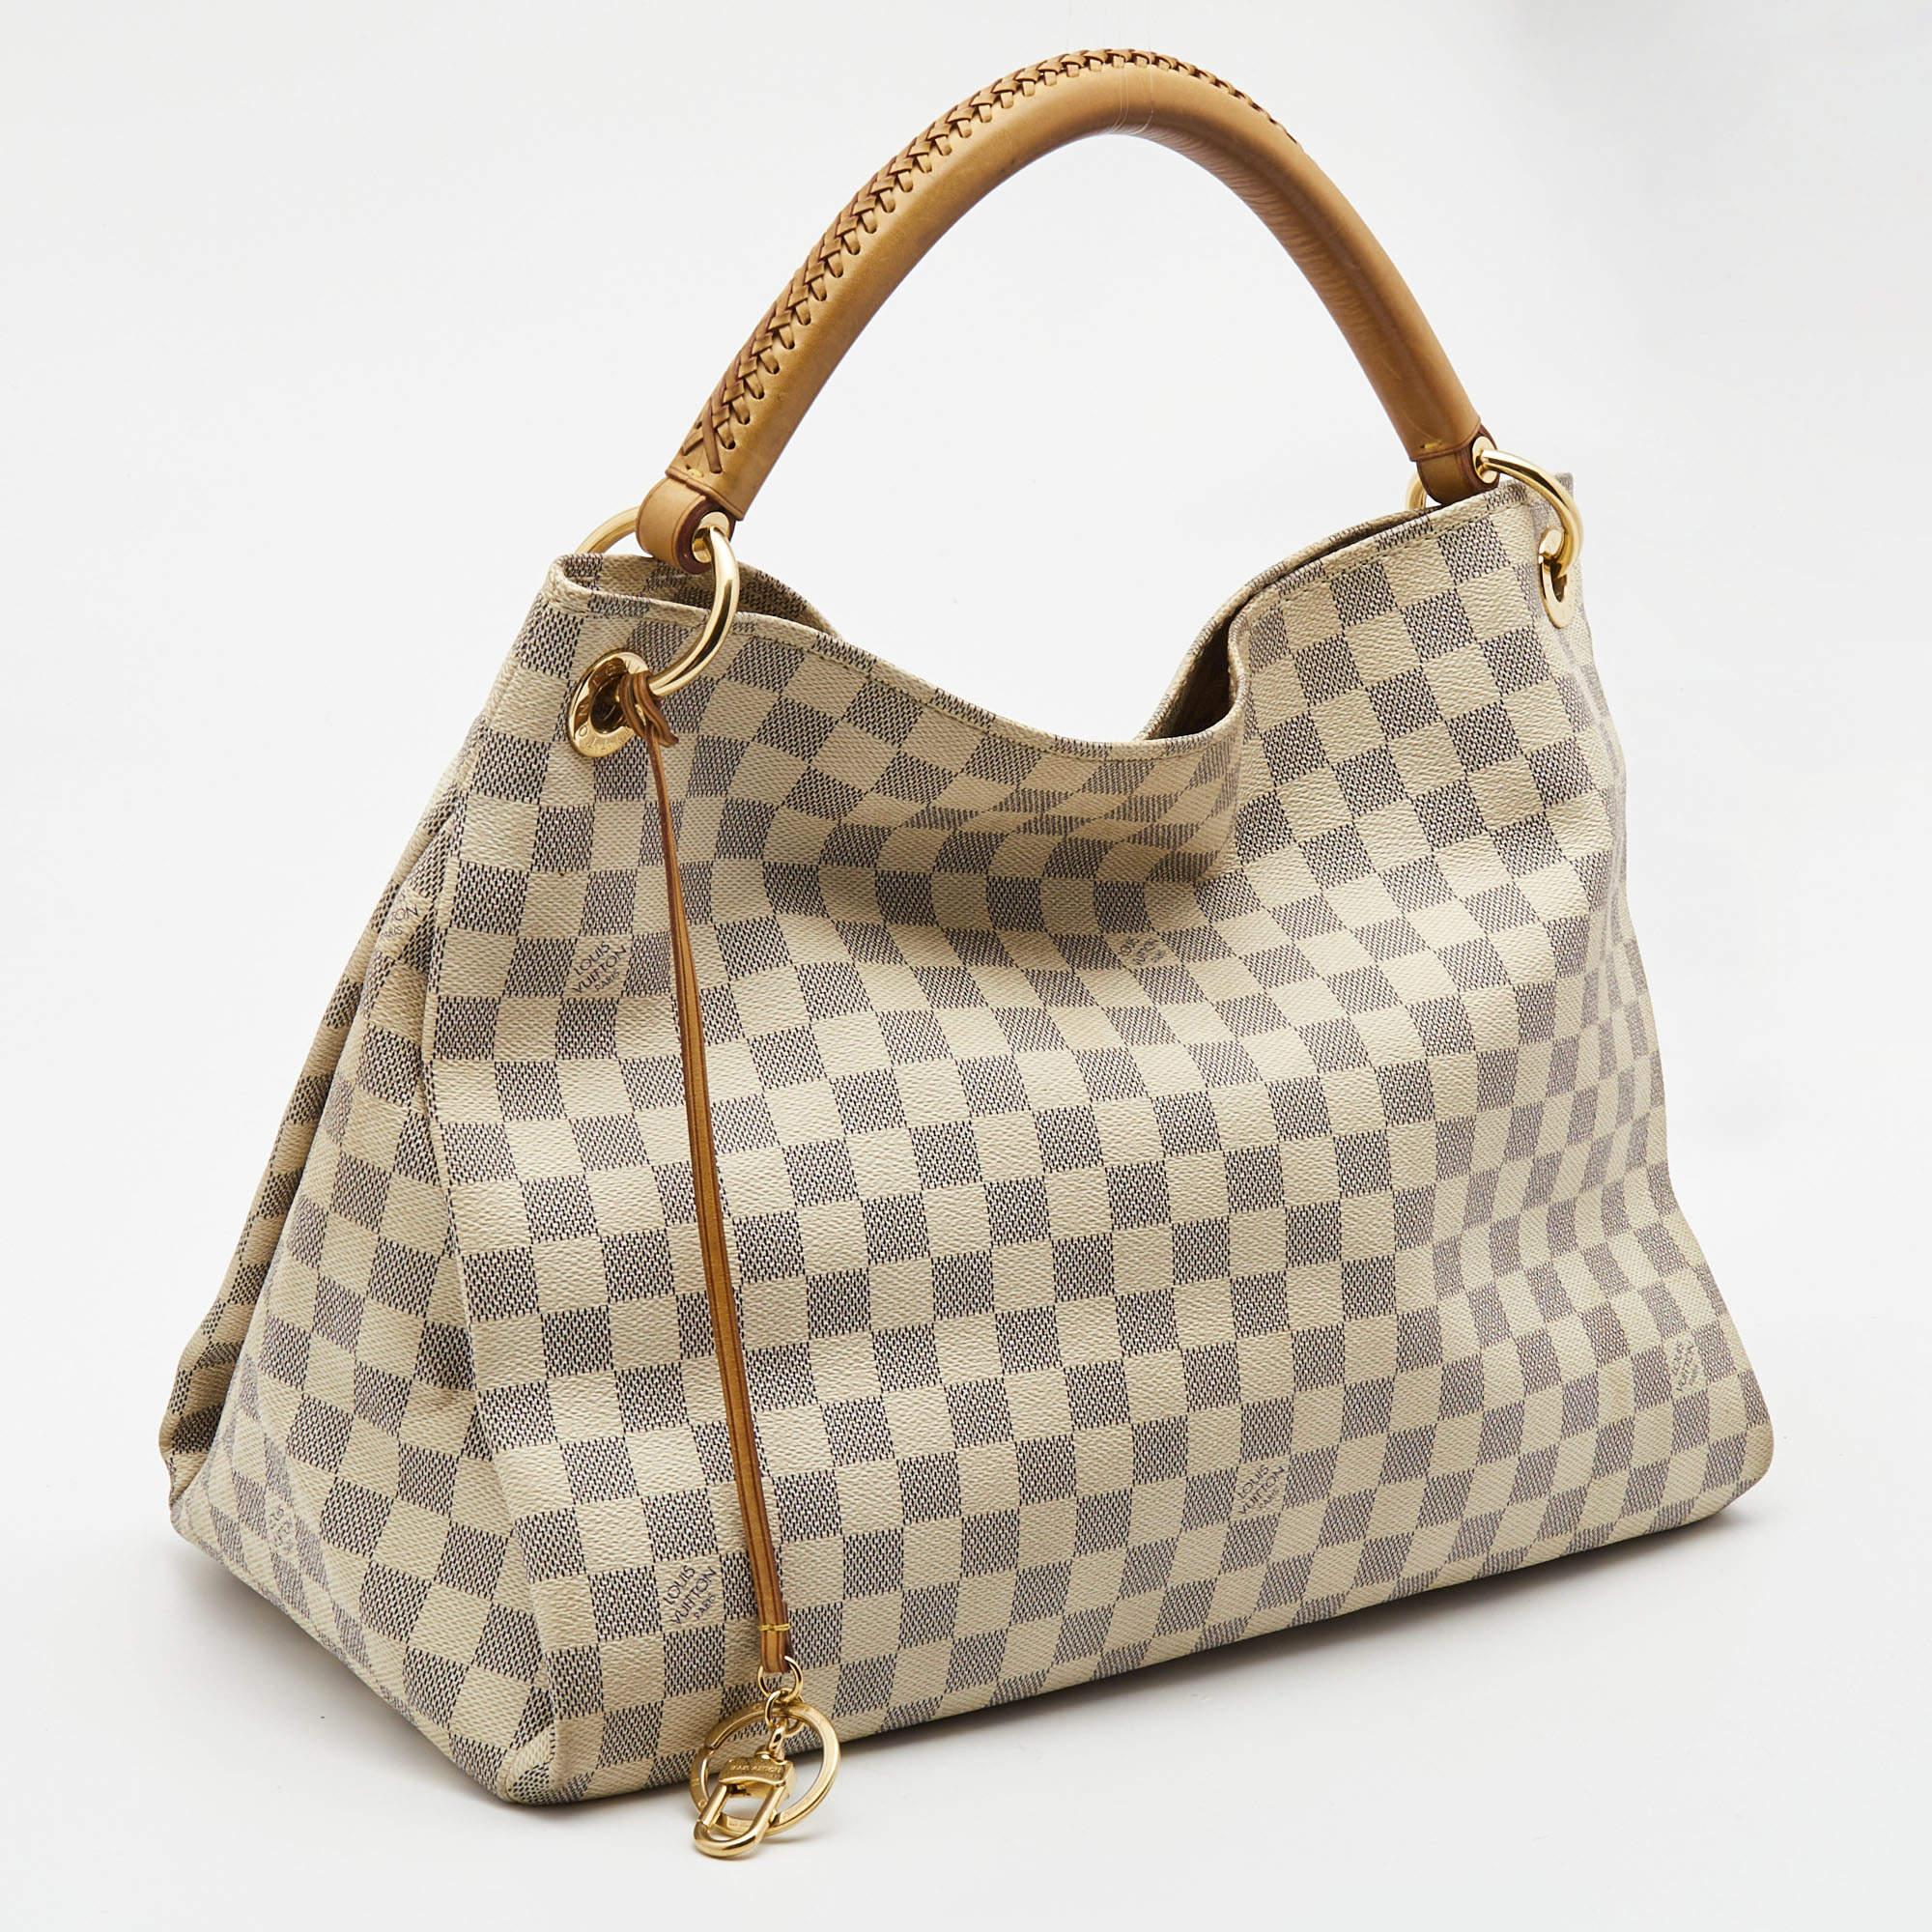 Indulge in luxury with this LV bag. Meticulously crafted from premium materials, it combines exquisite design, impeccable craftsmanship, and timeless elegance. Elevate your style with this fashion accessory.

